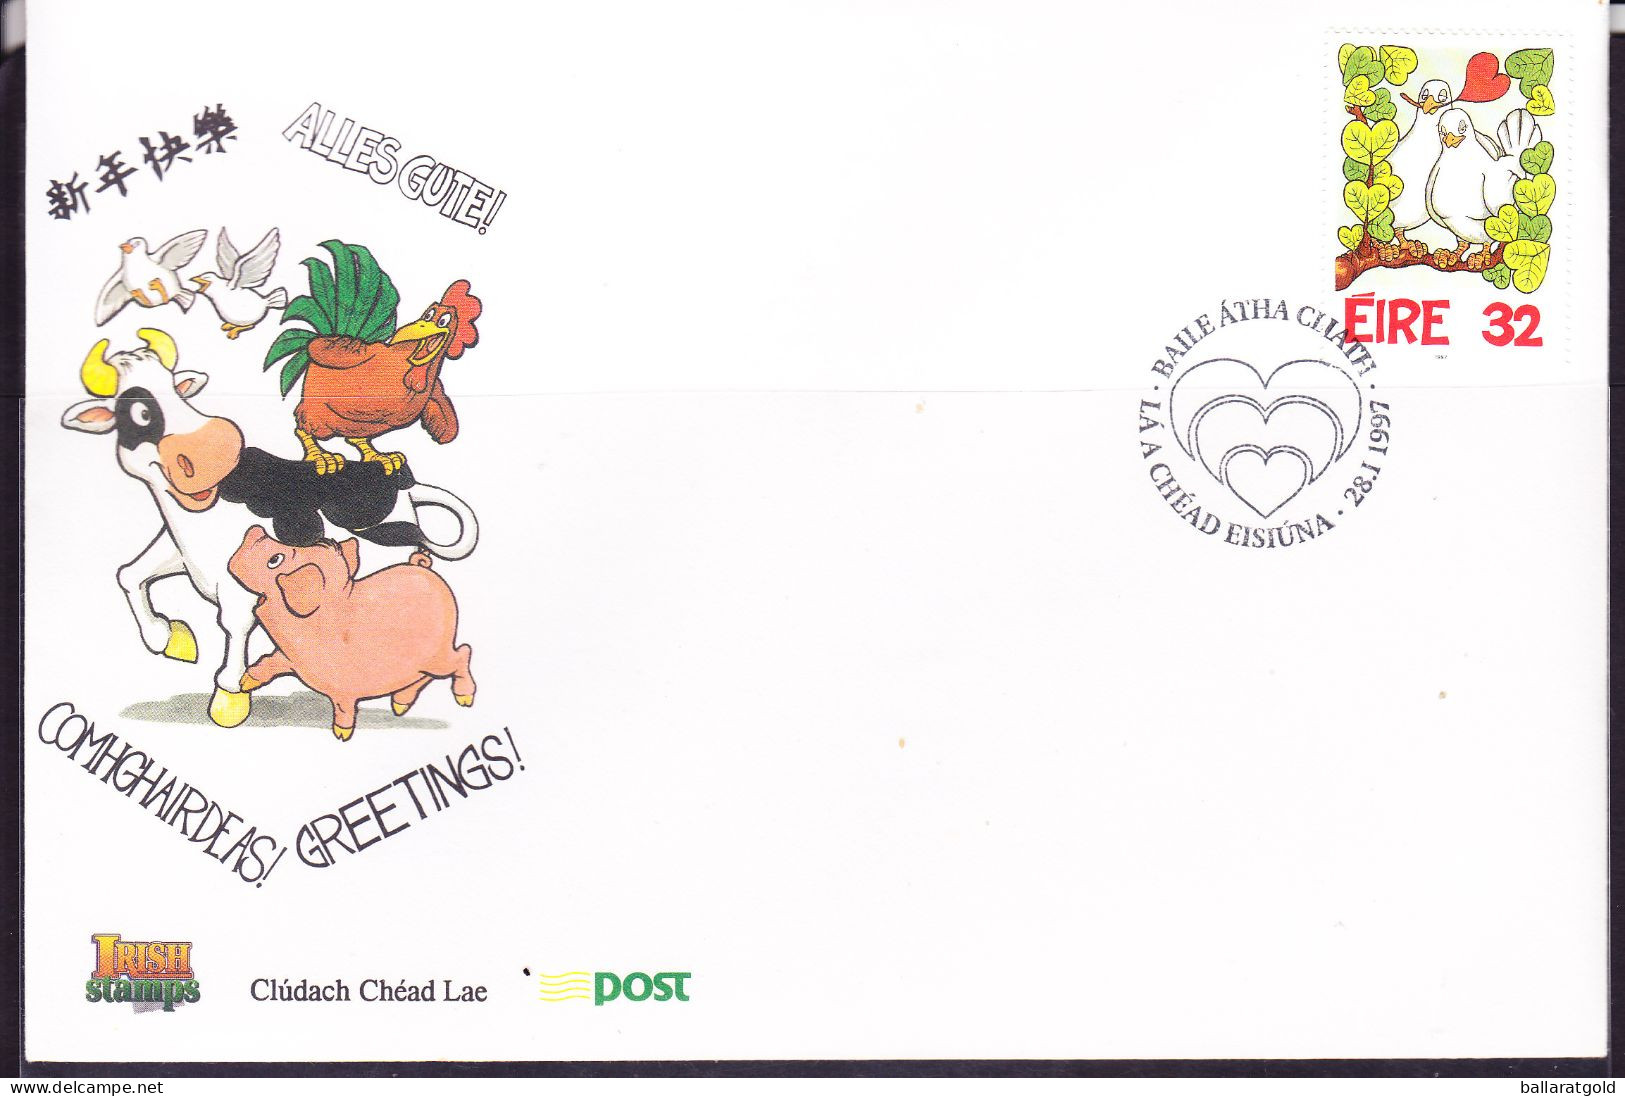 Ireland 1997 Greetings  First Day Cover - Unaddressed - Briefe U. Dokumente